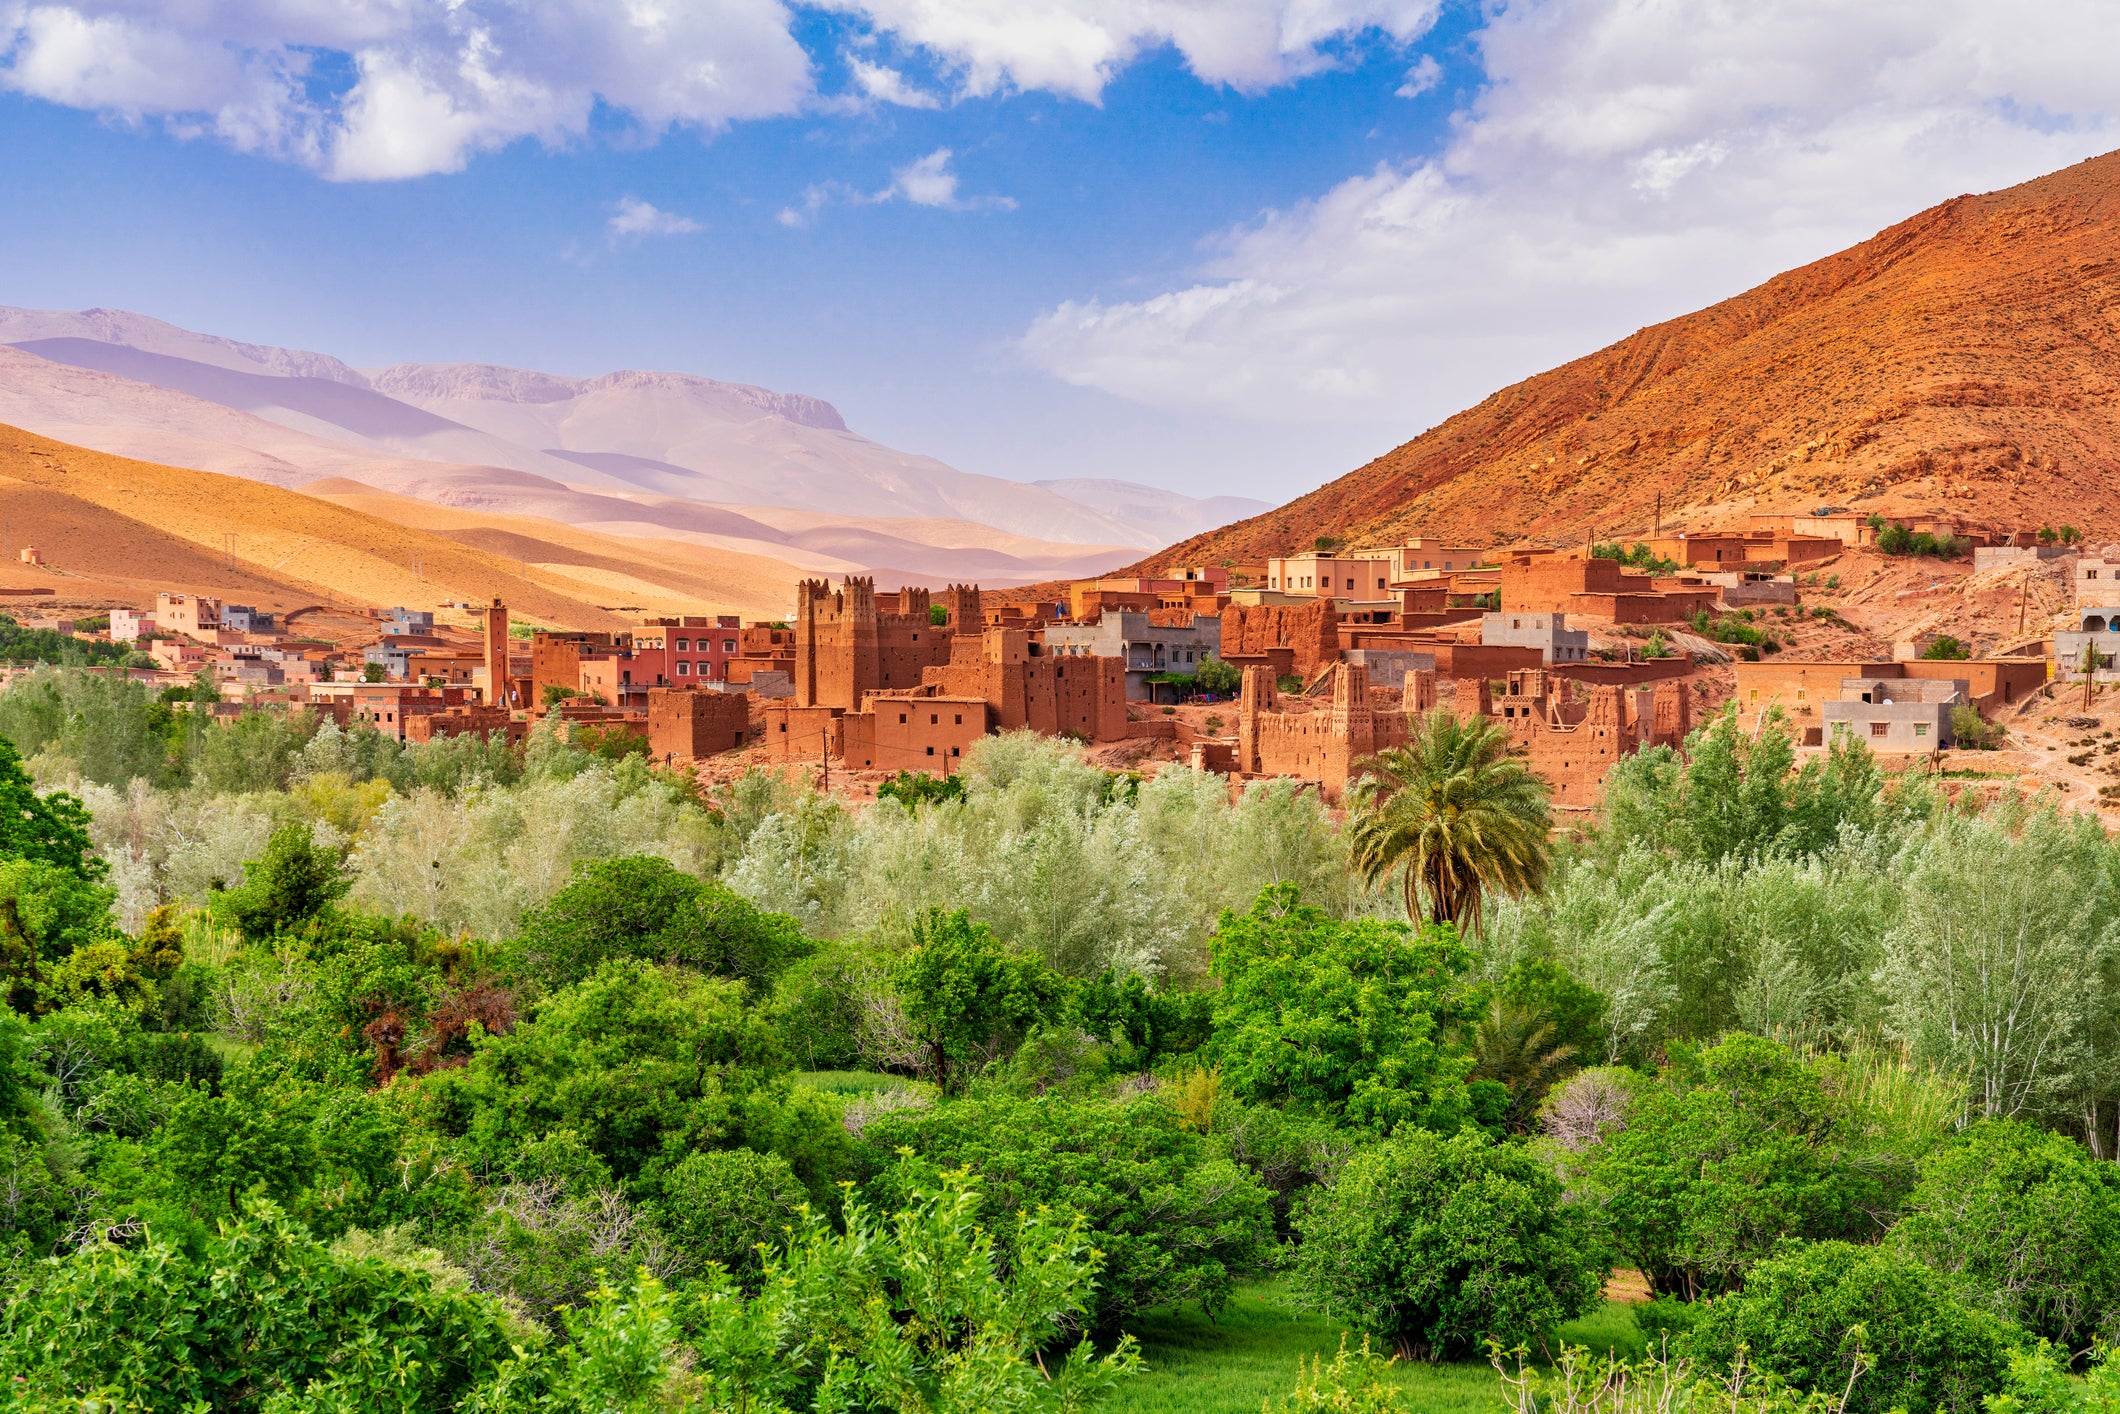 The Atlas Mountains are dotted with kasbahs and Berber villages